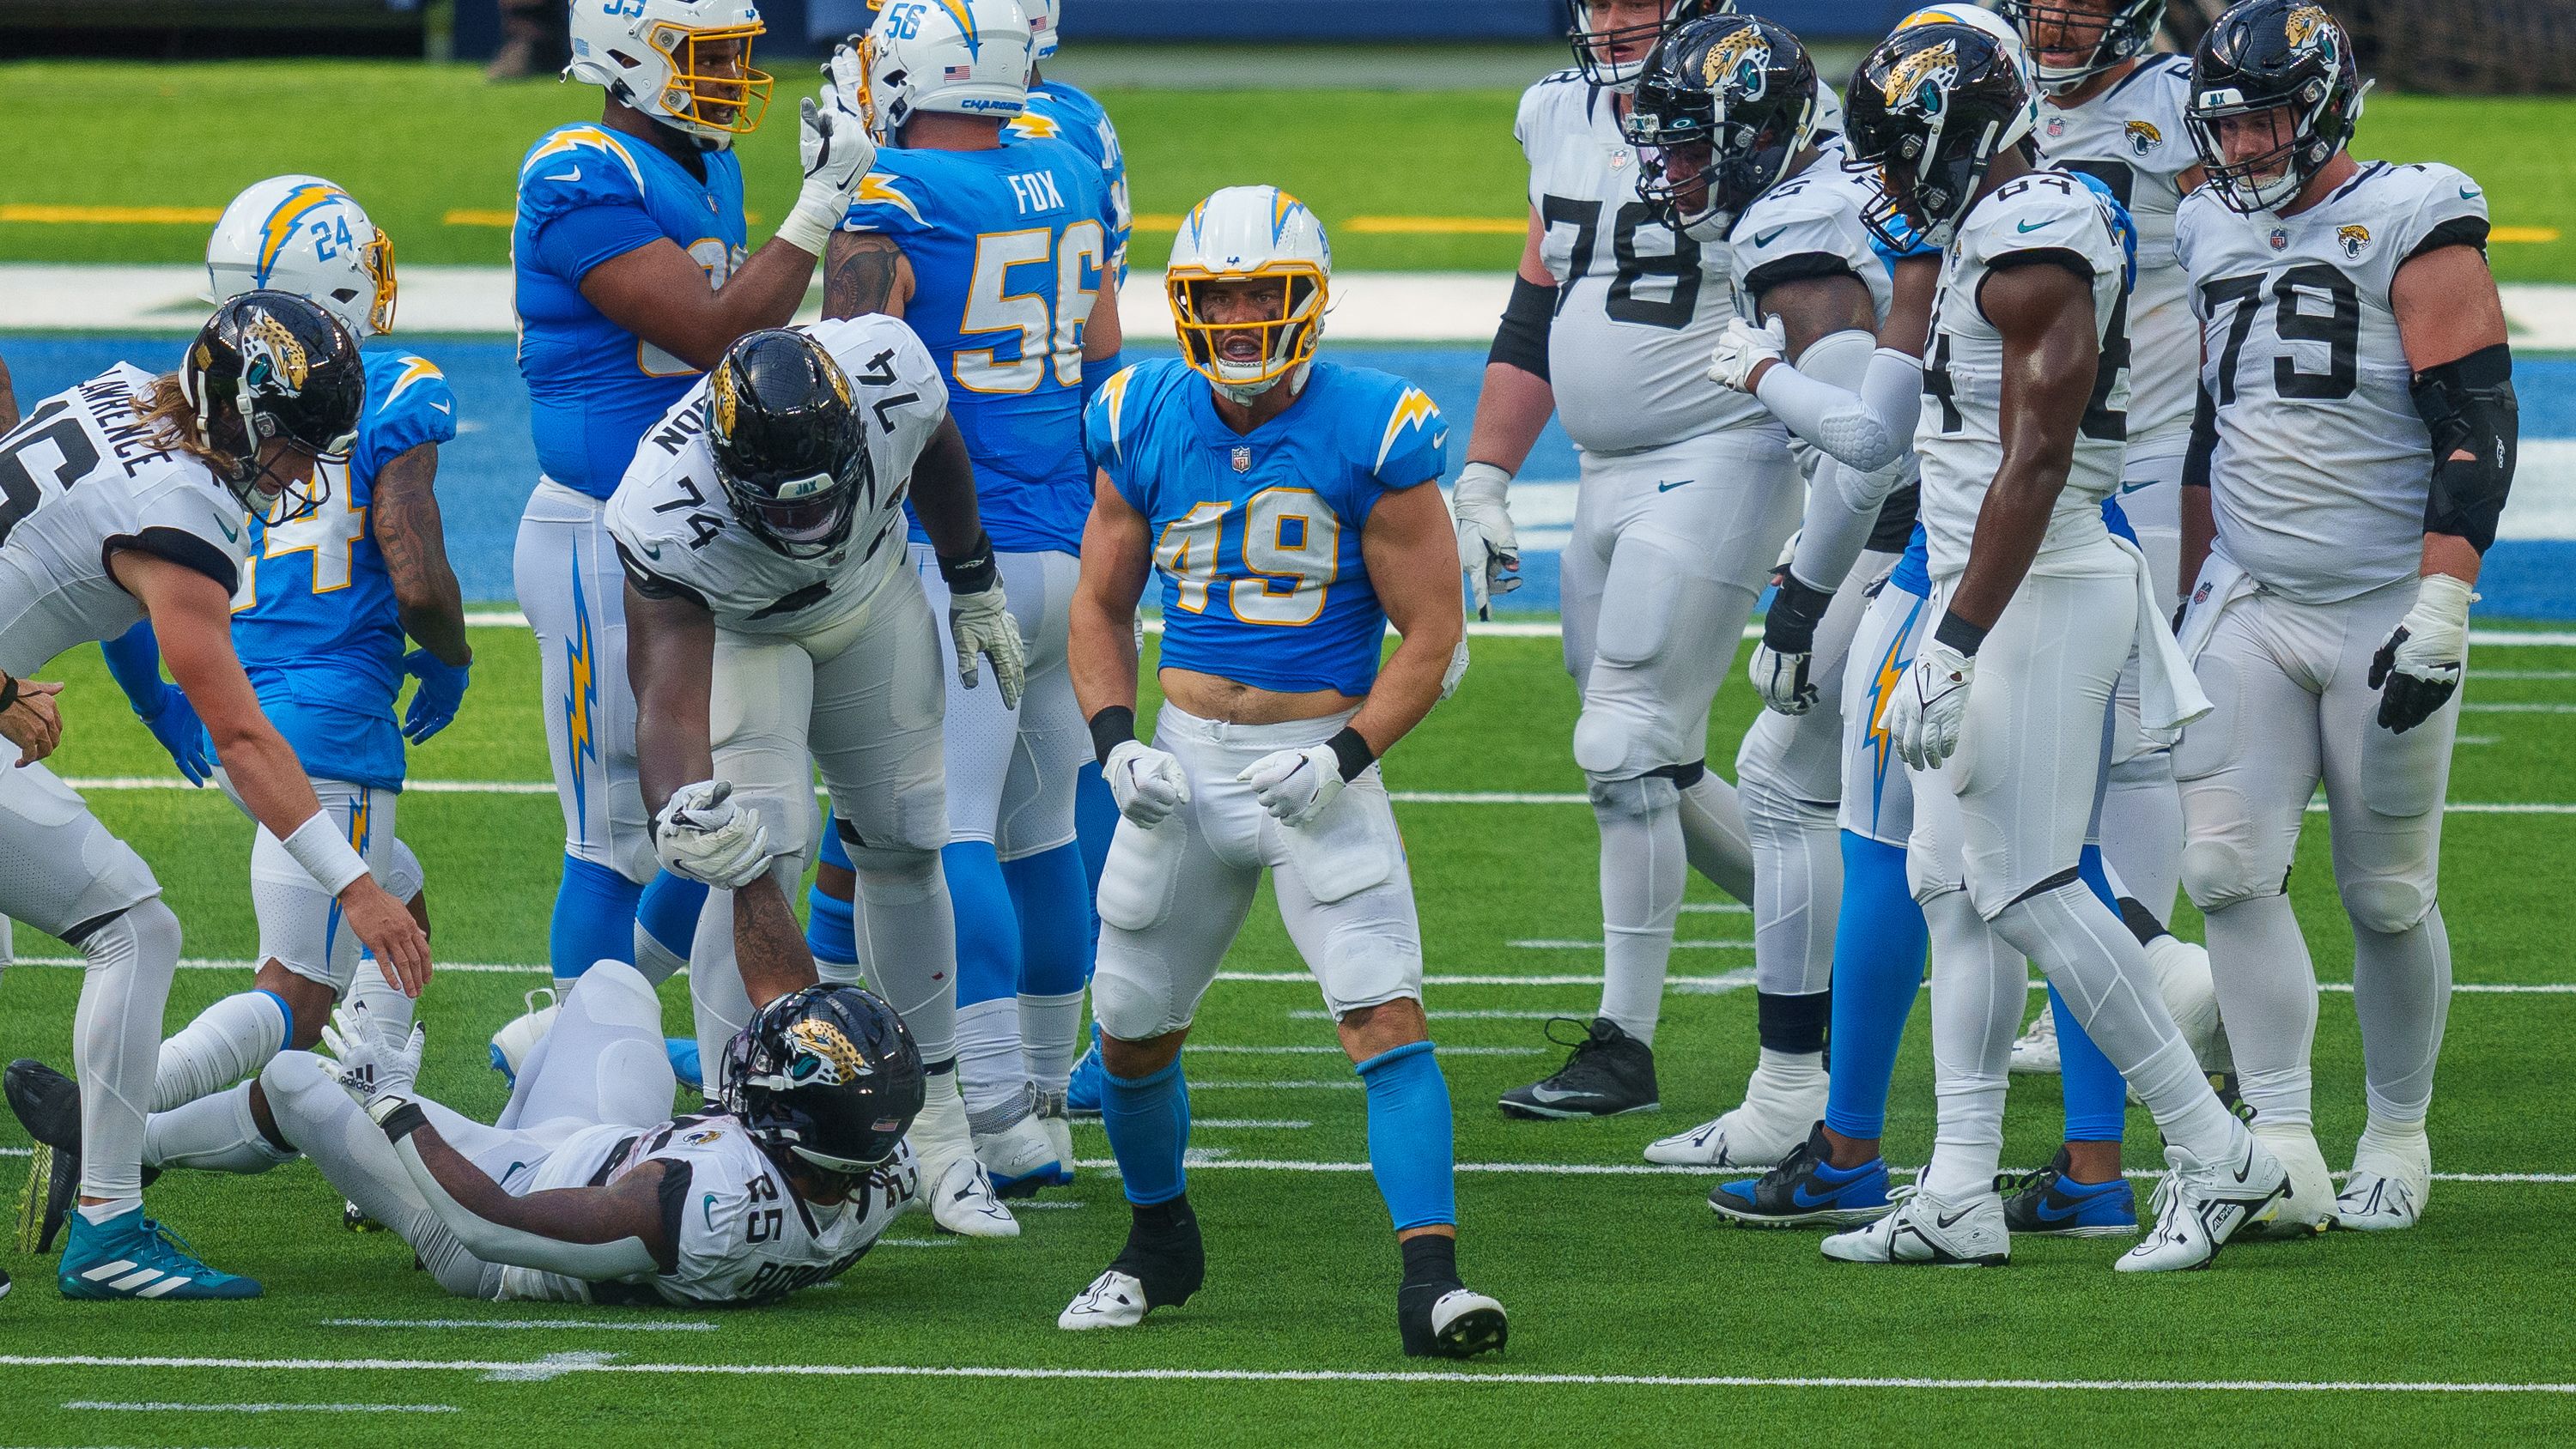 jacksonville jaguars at los angeles chargers